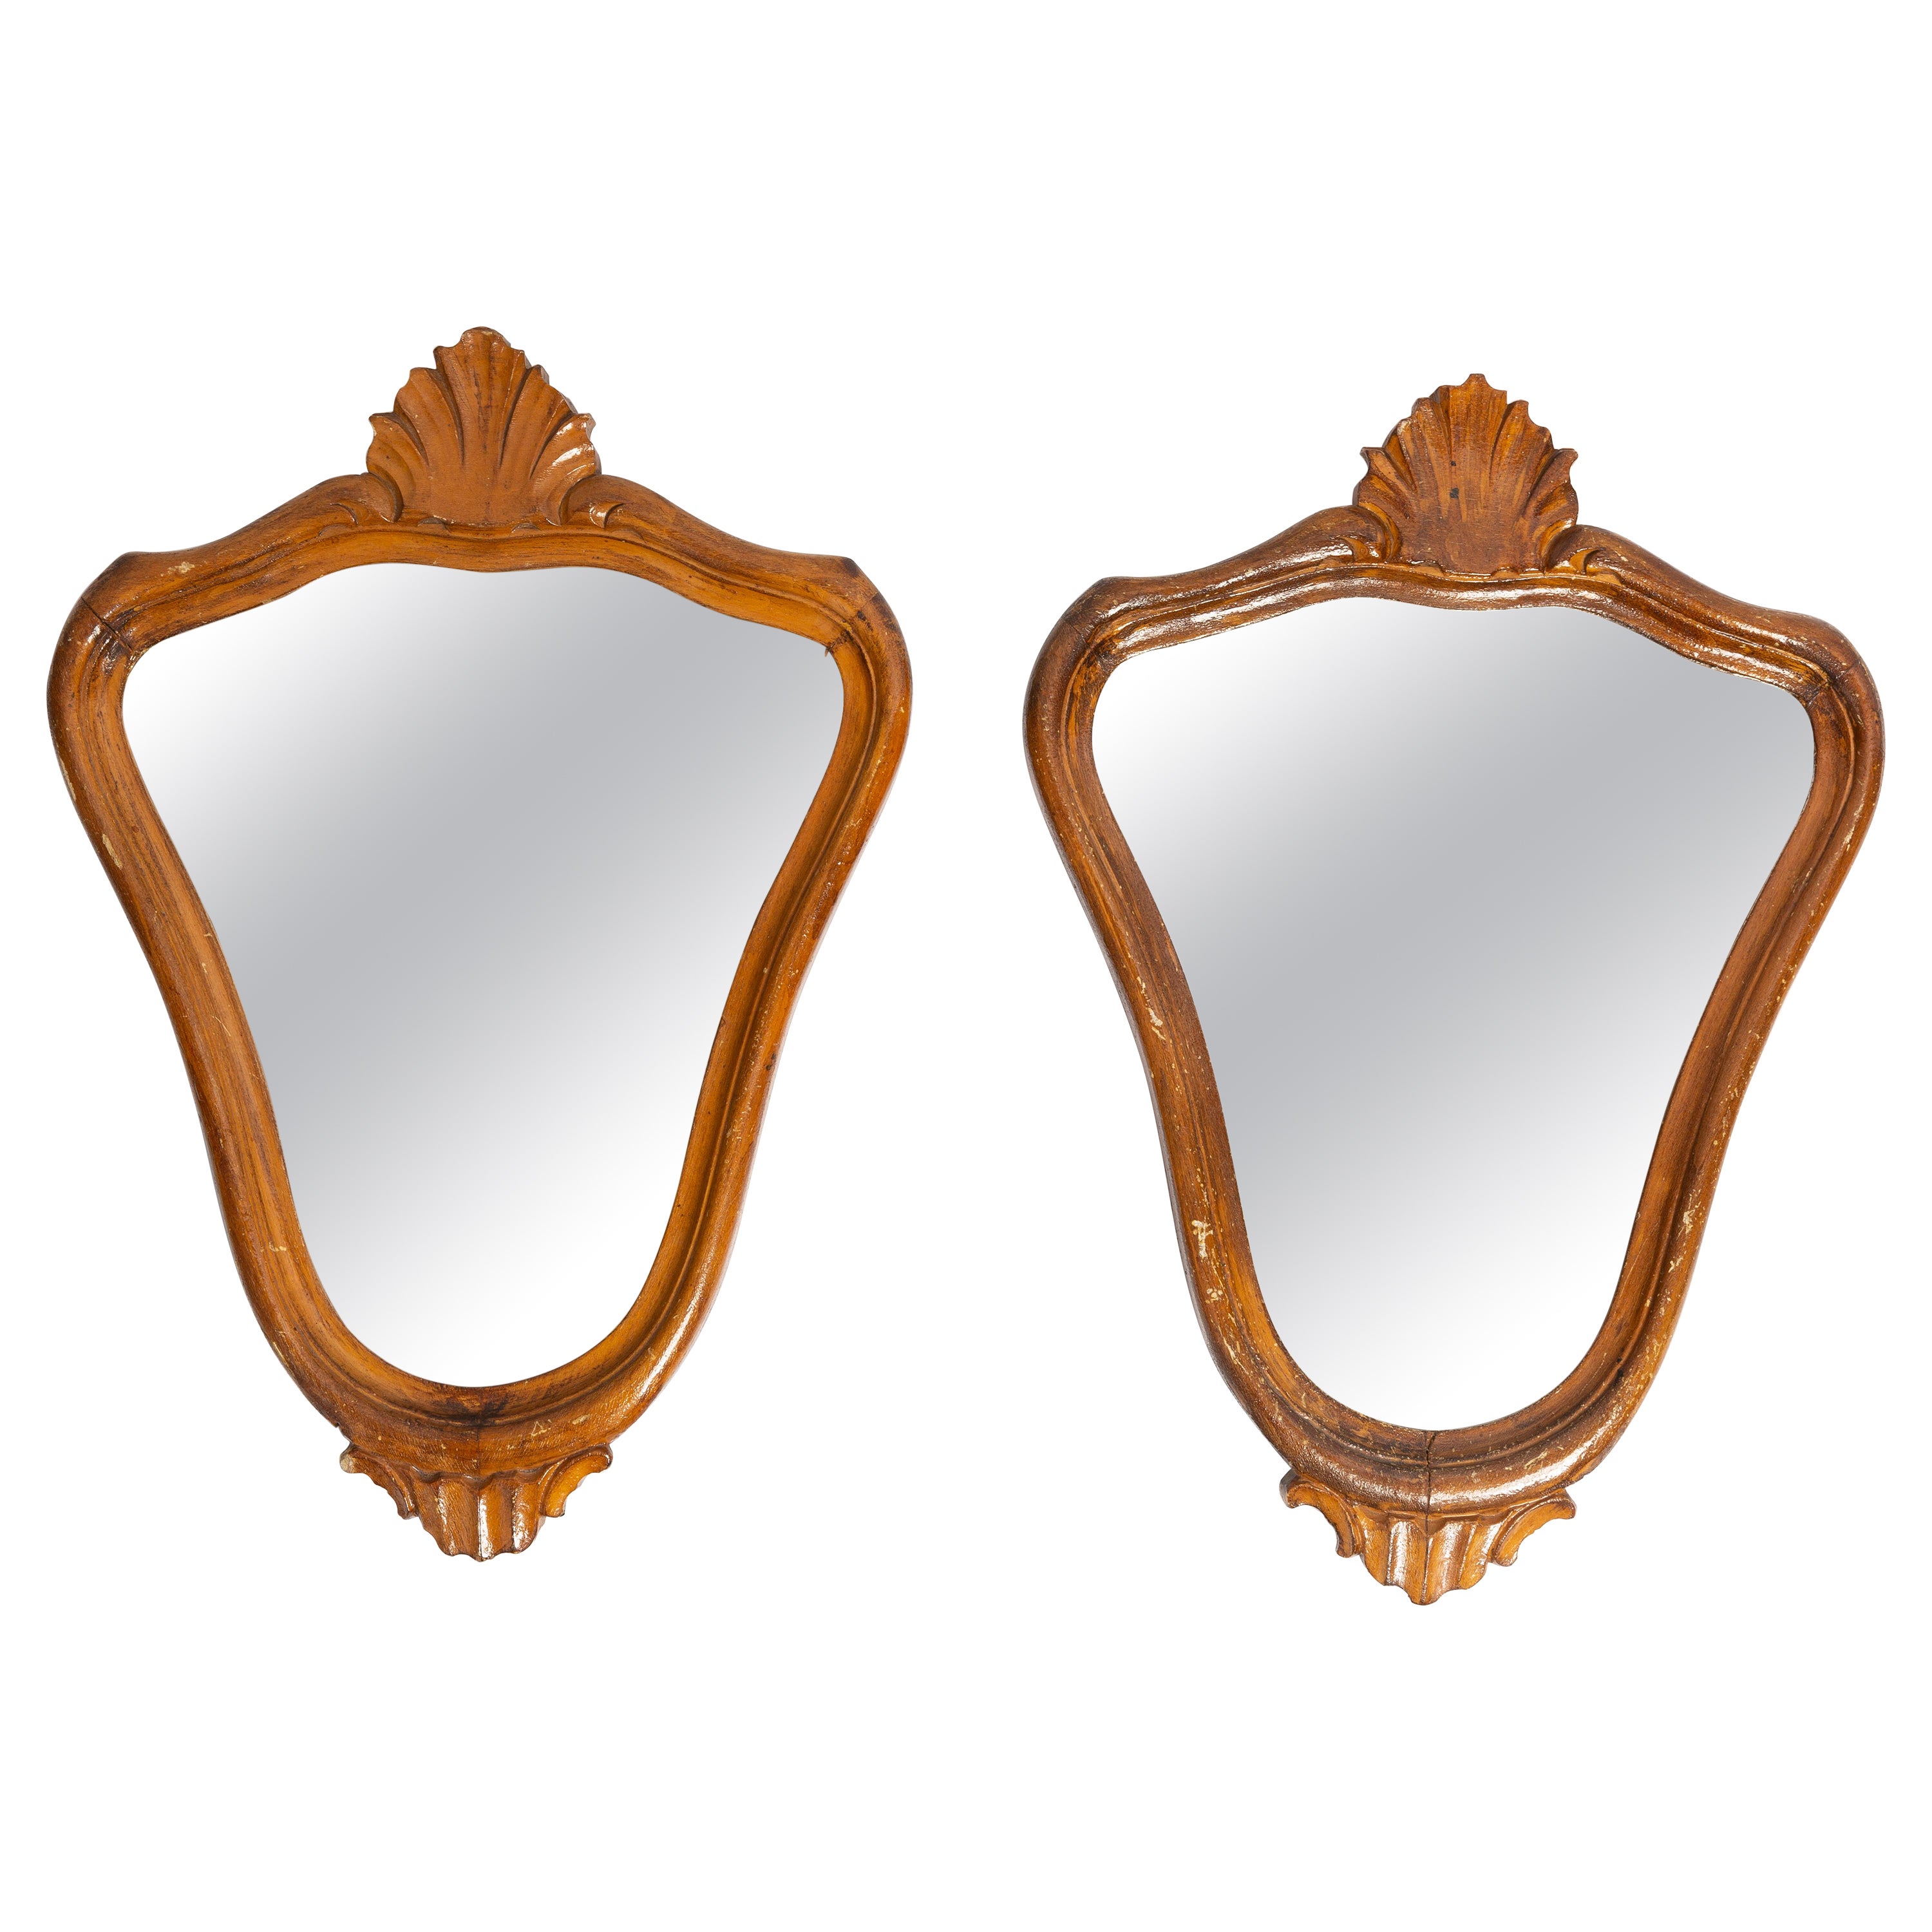 Pair of Mid Century Decorative Vintage Mirrors in Gold Frame, Italy, 1960s